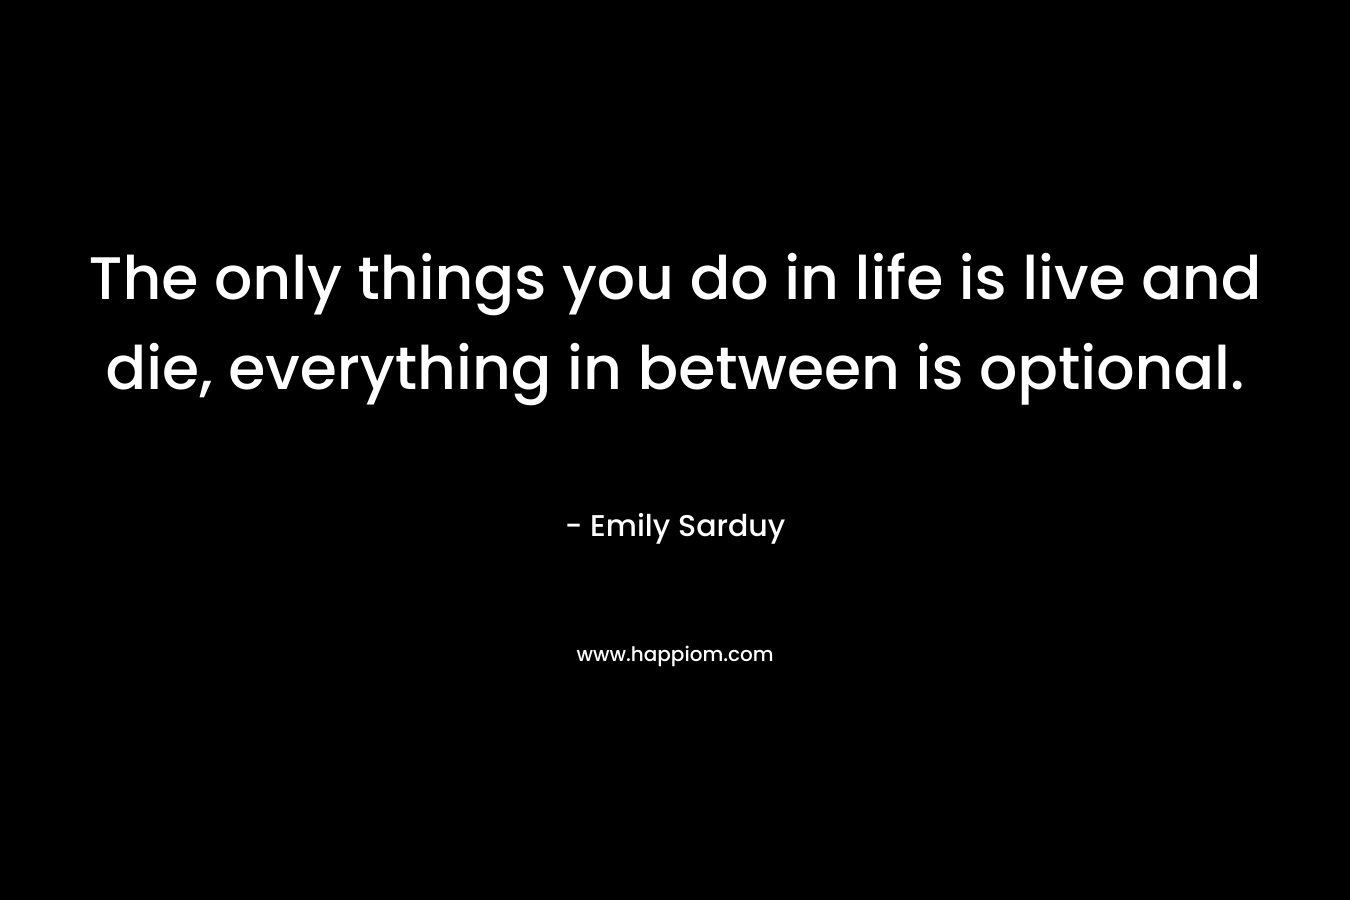 The only things you do in life is live and die, everything in between is optional.